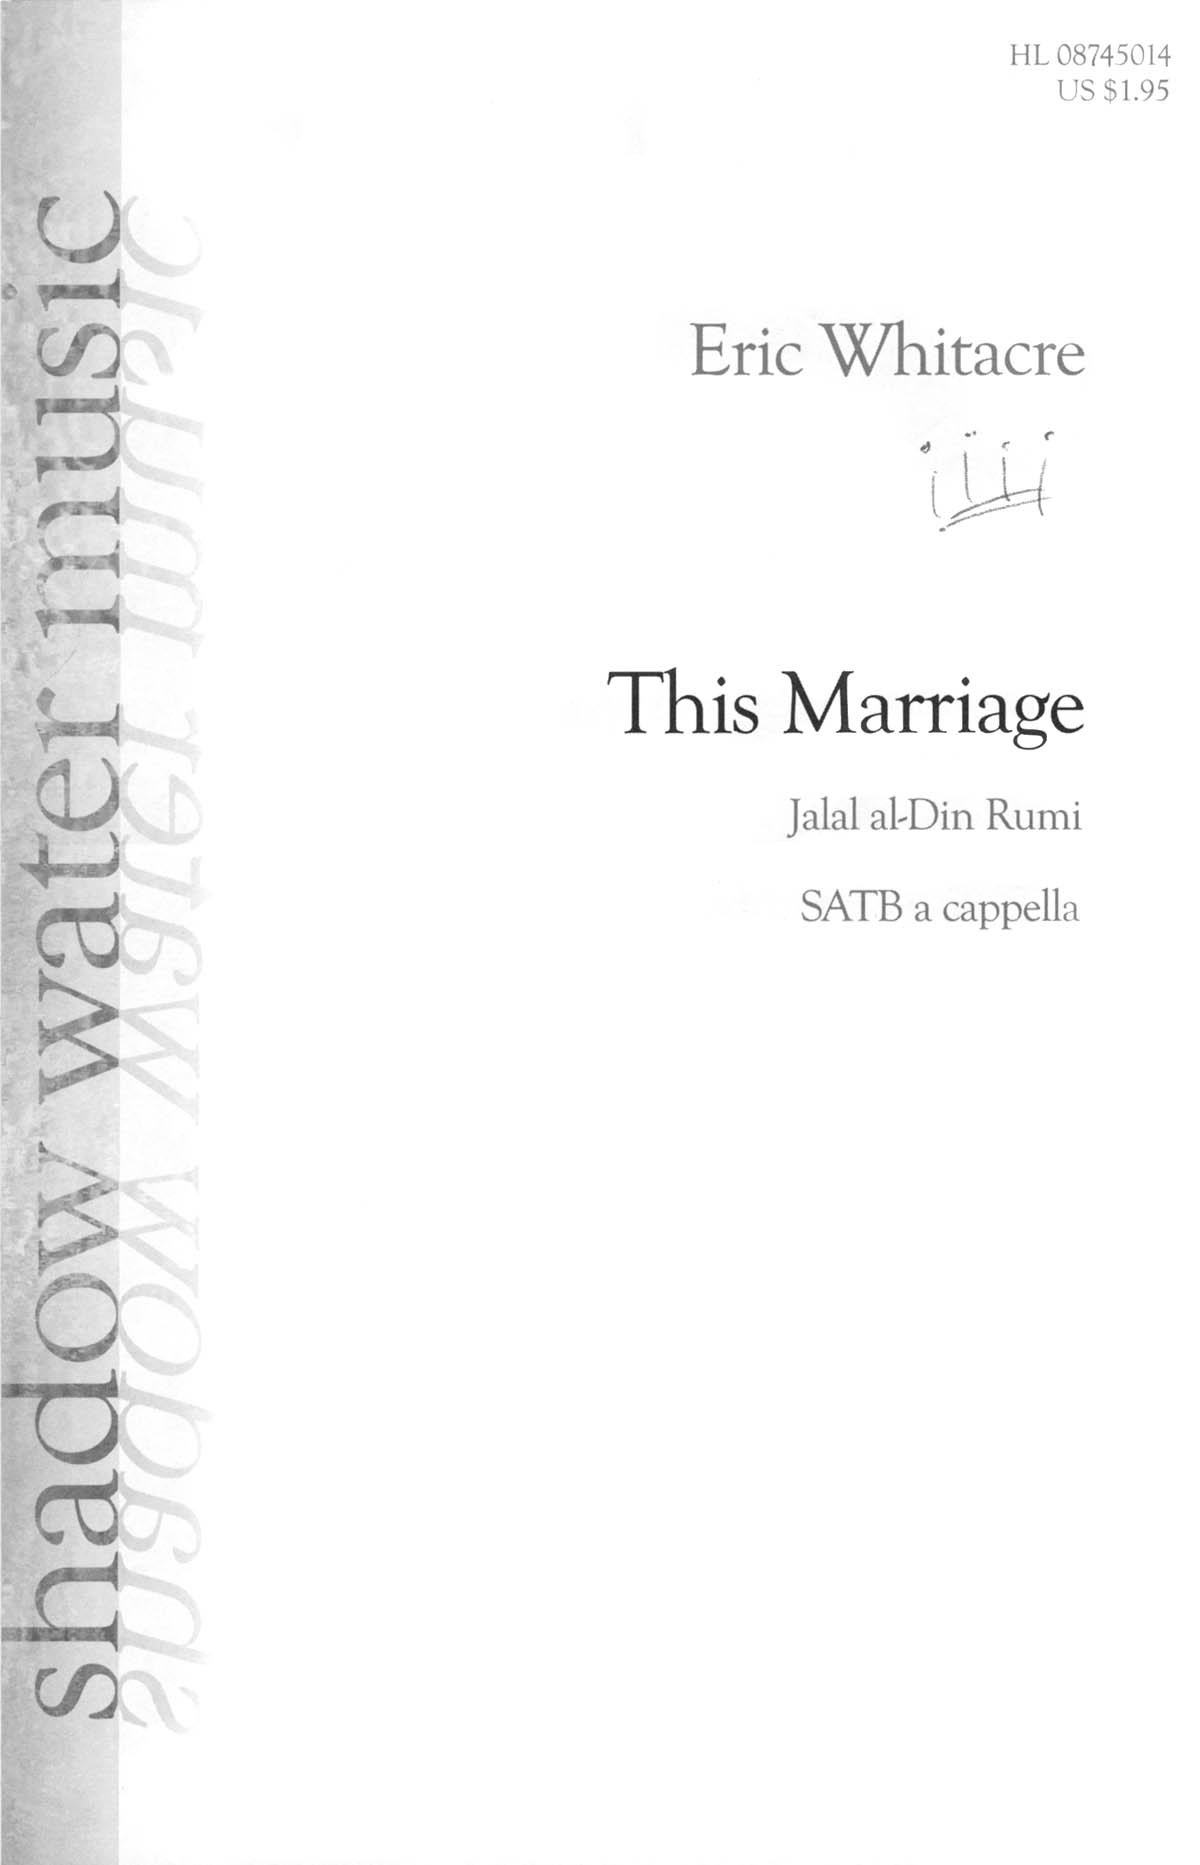 Eric Whitacre: This Marriage